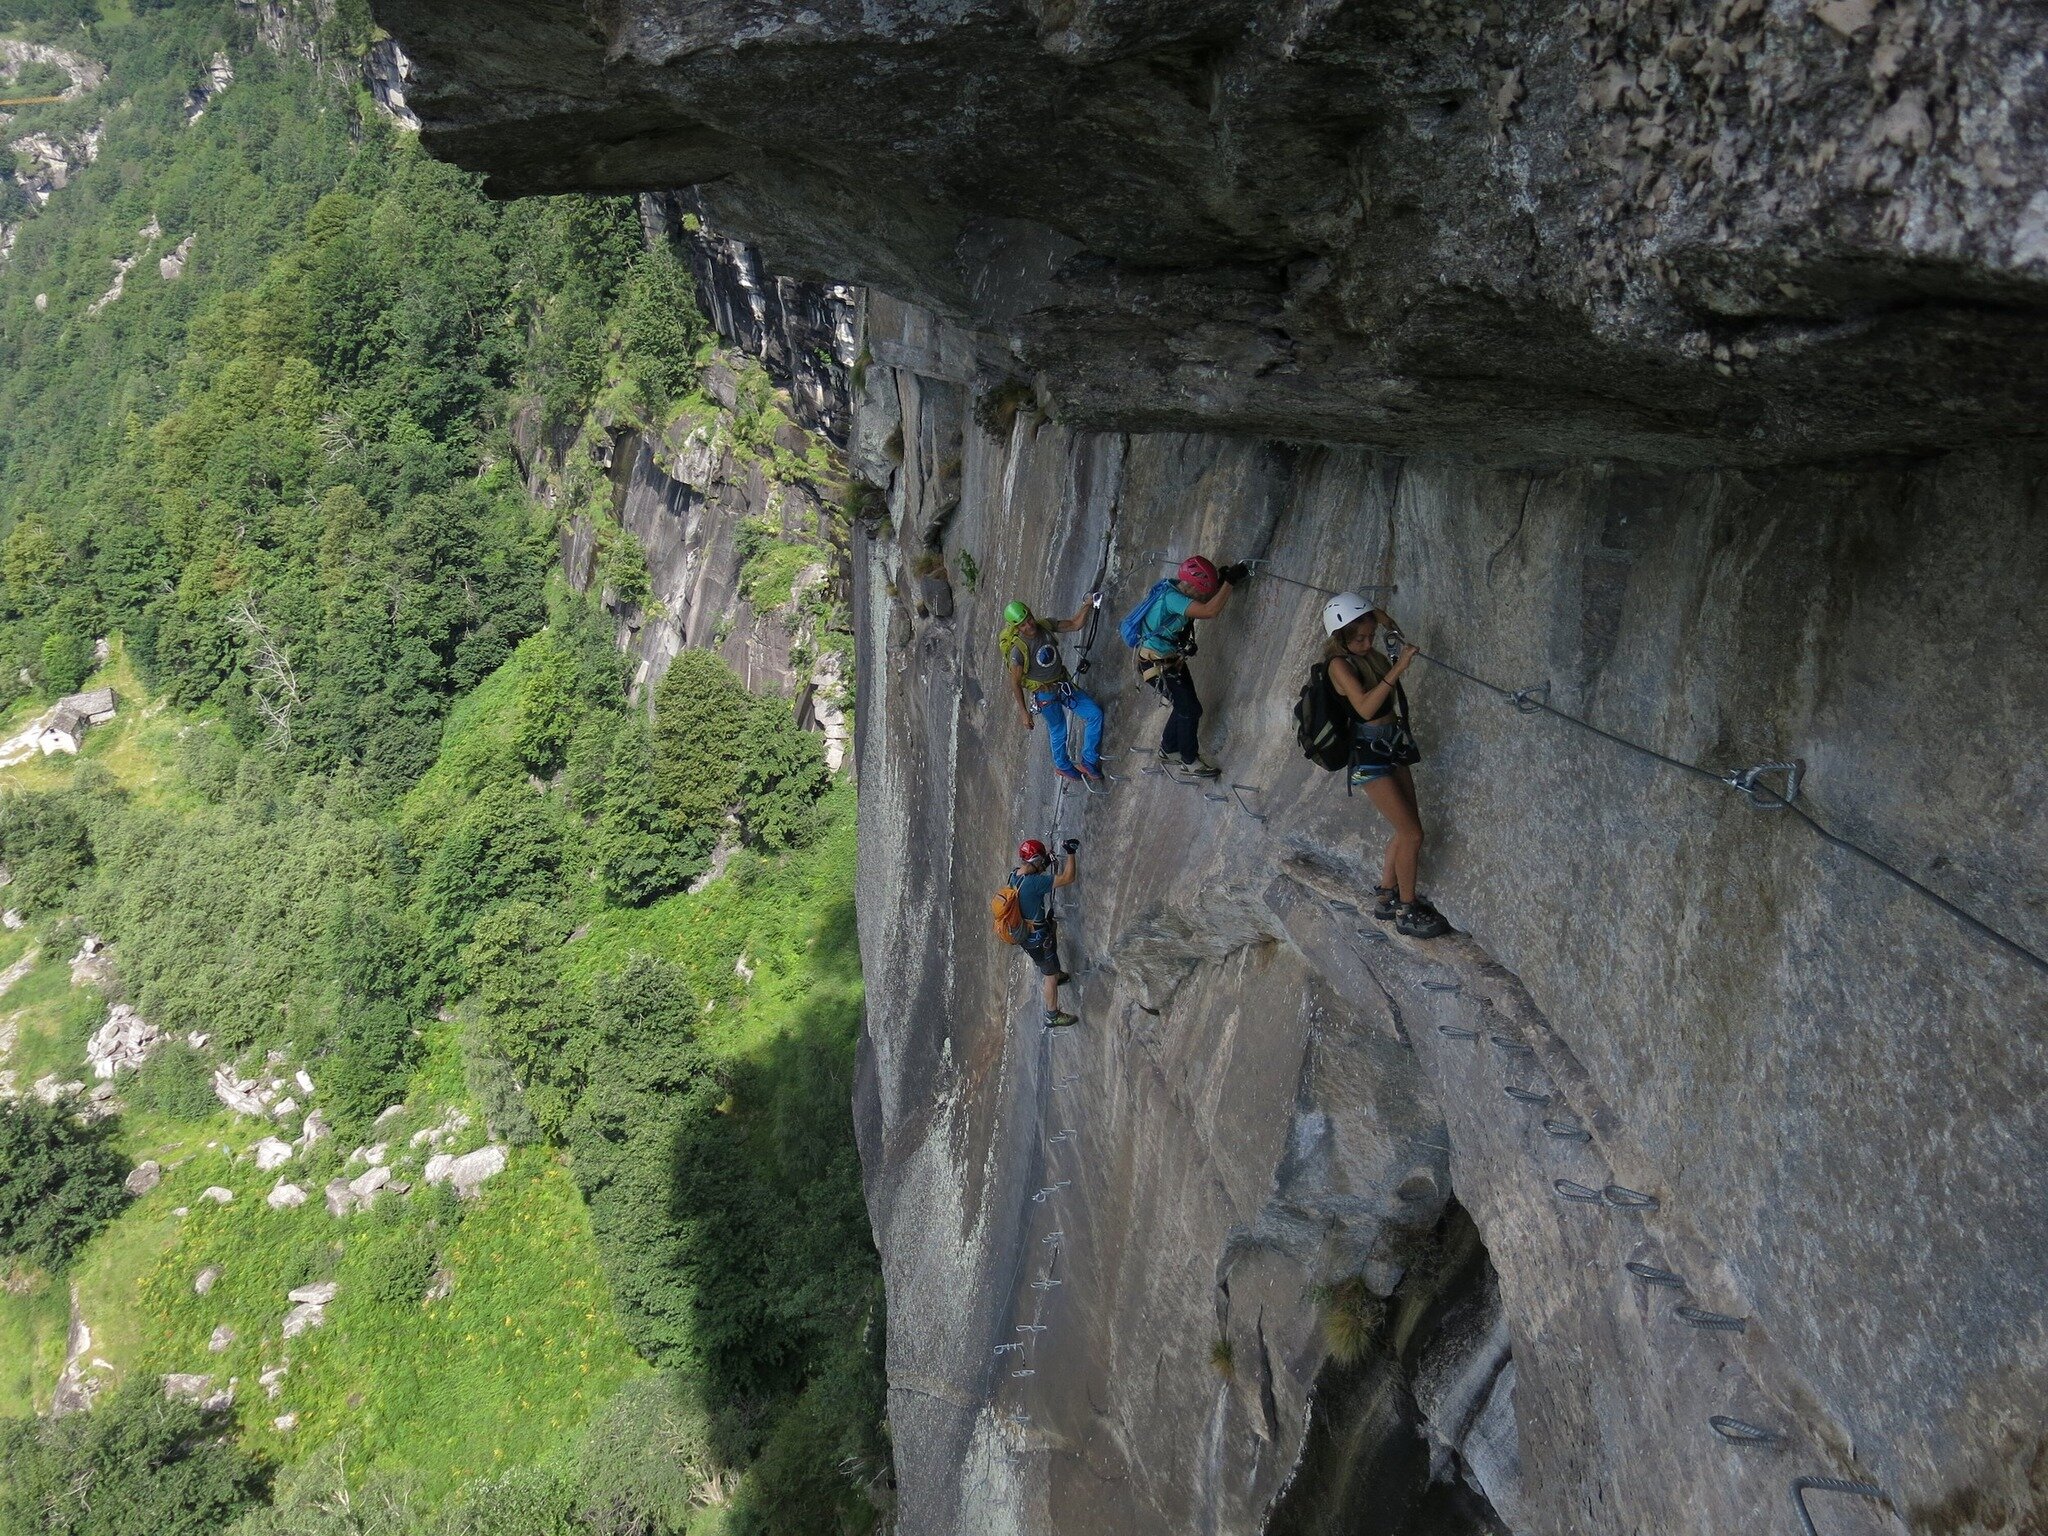 We have some epic Via Ferrata trips coming up this spring and summer! Via Ferreta is an old way of safely getting around the mountains. You clip into metal work whilst scrambling up into hard-to-reach places. It's a great place to start if you want t